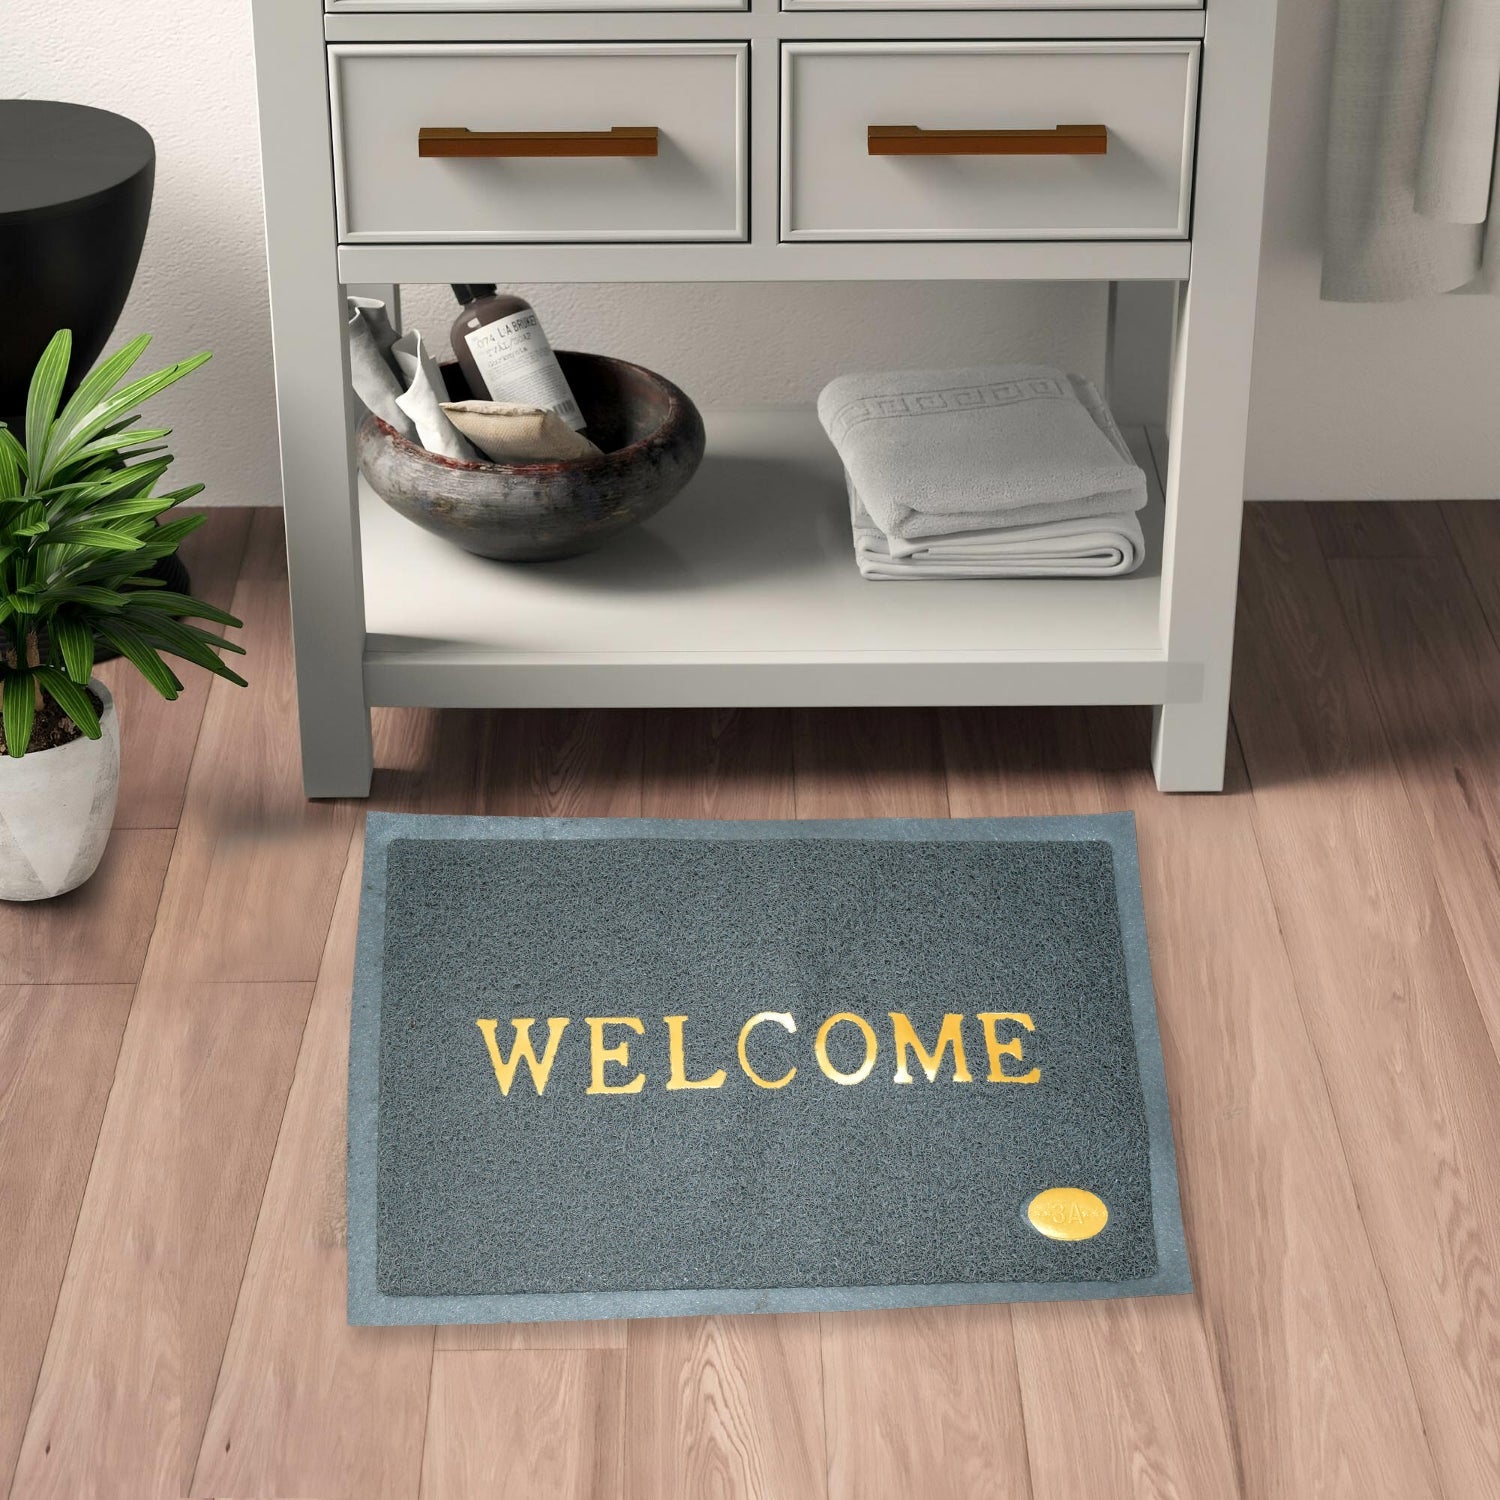 8822 Welcome Door Mat for Home Entrance Outdoor Mat Anti Slip Heavy Duty and Waterproof | Easy to Clean for Entry For Bedroom, Living Room (23x15 Inch)